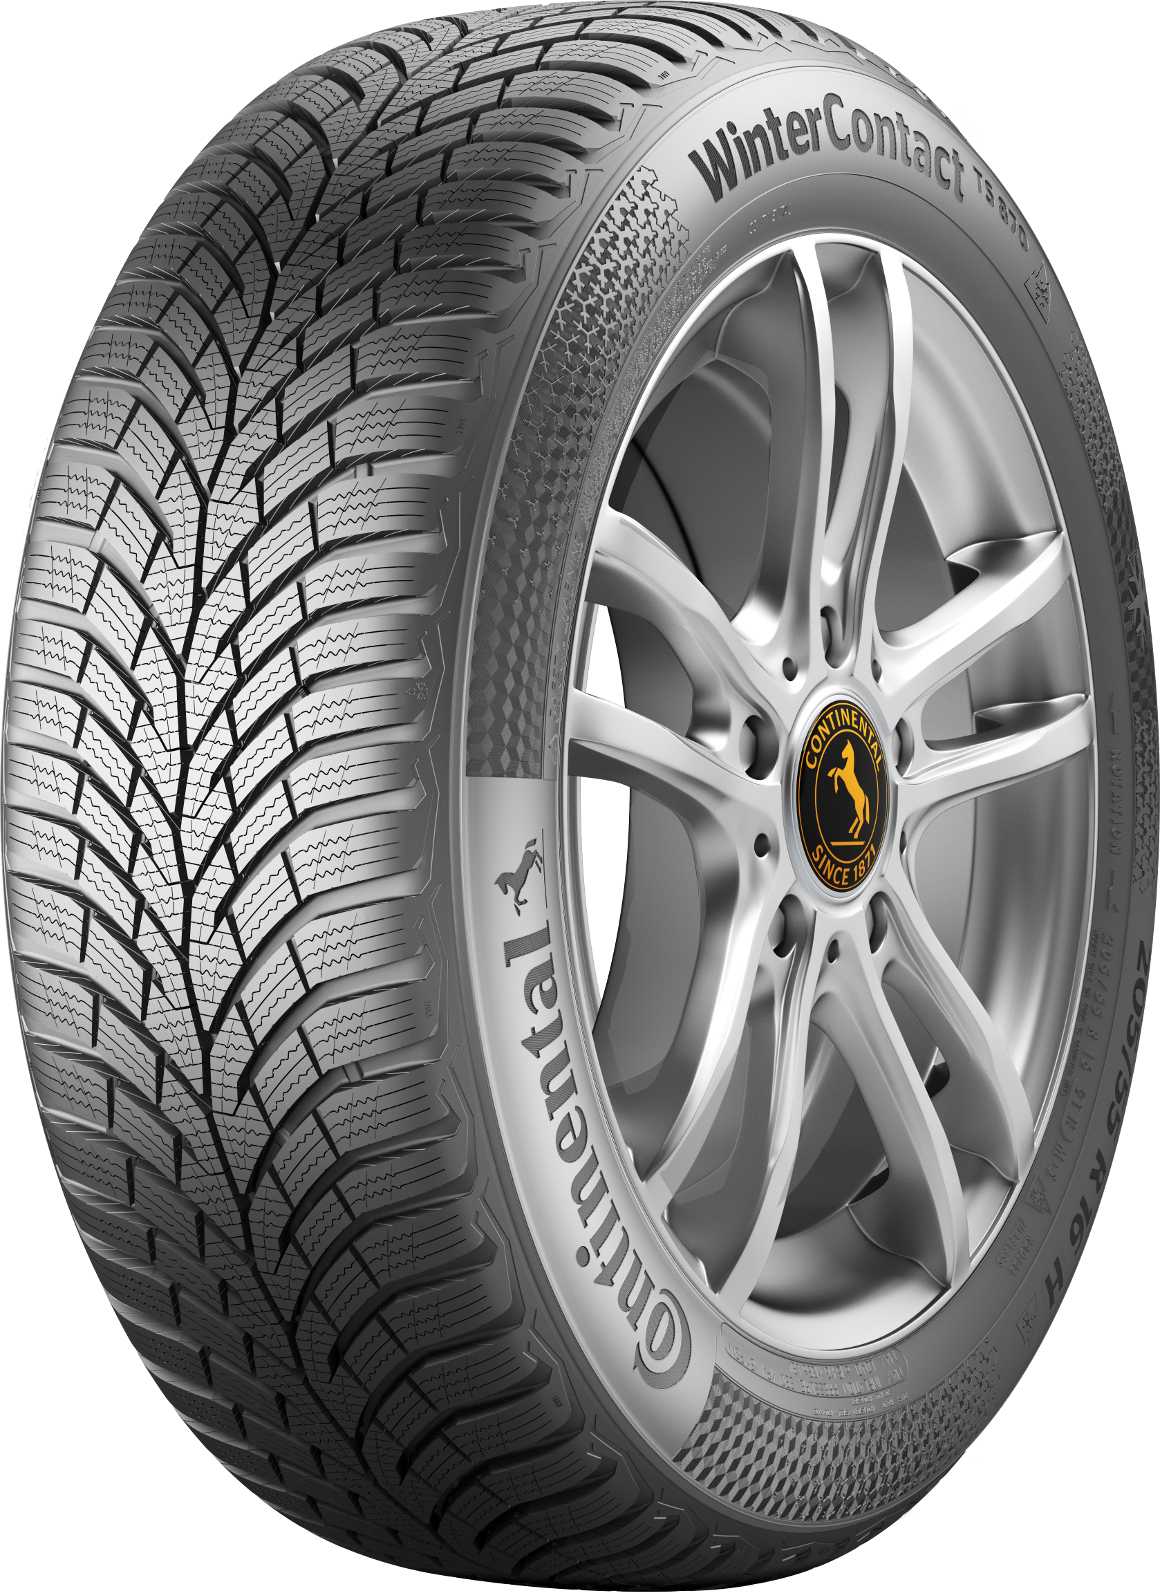    Continental Winter Contact TS870 205/60 R16 